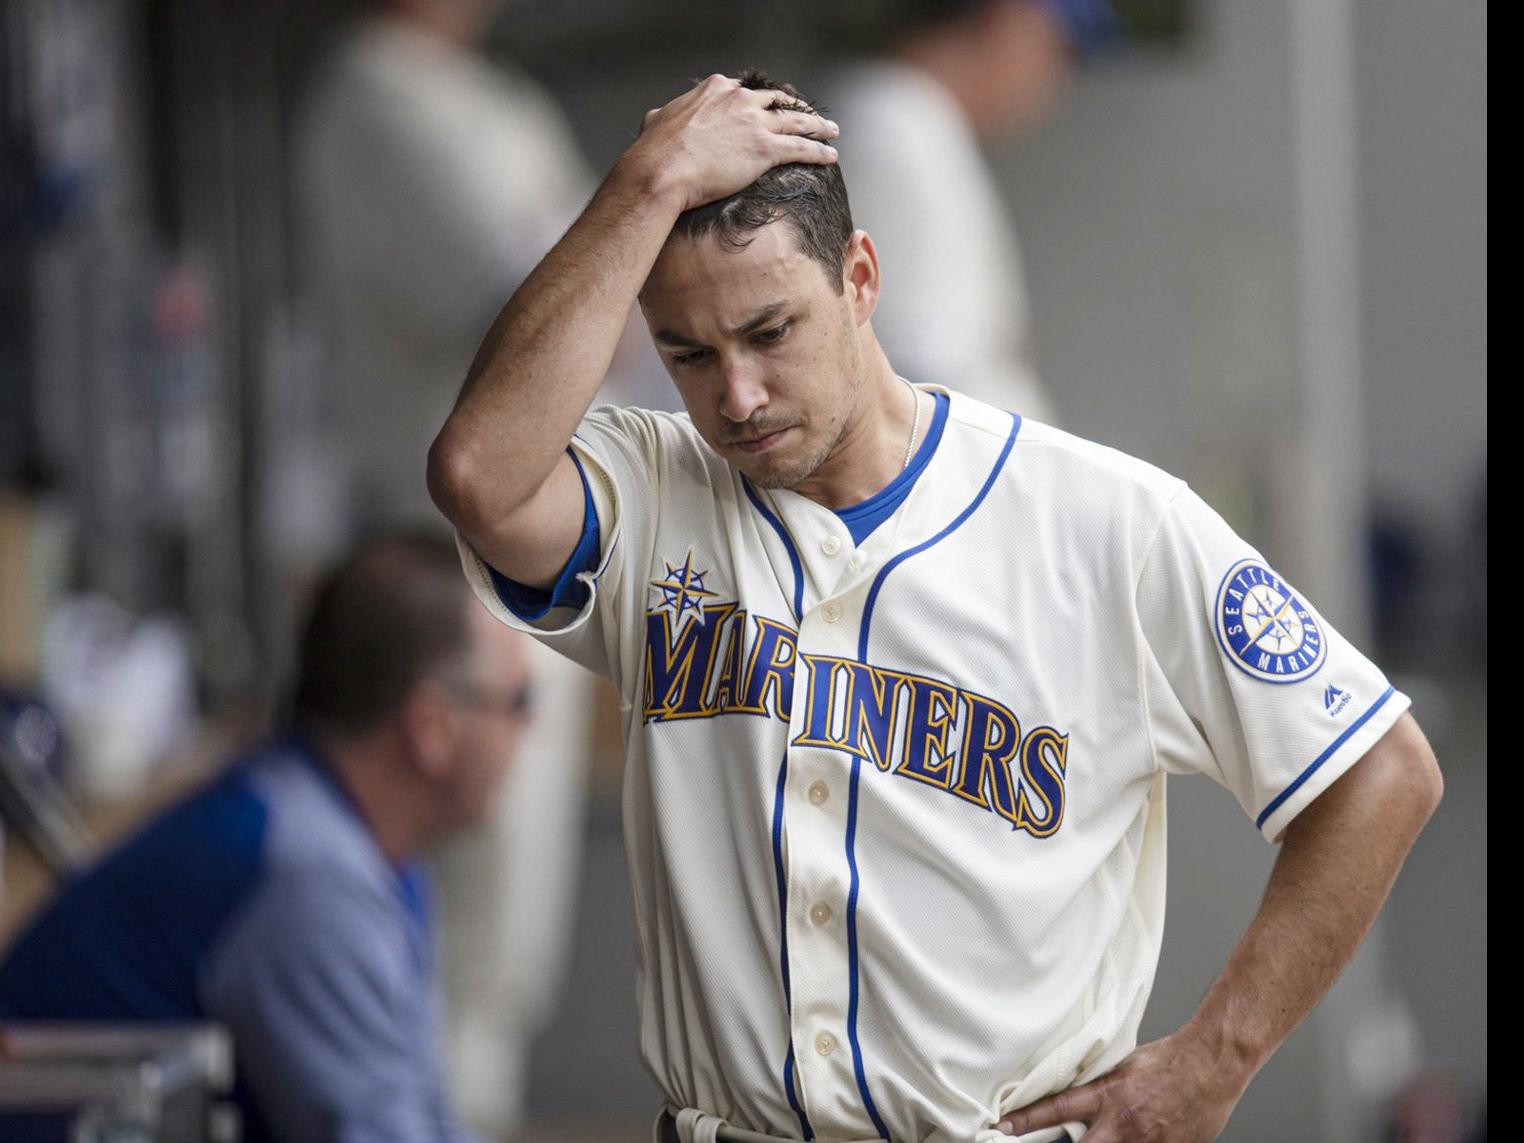 Marco Gonzales' struggles continue as Mariners swamped by Angels